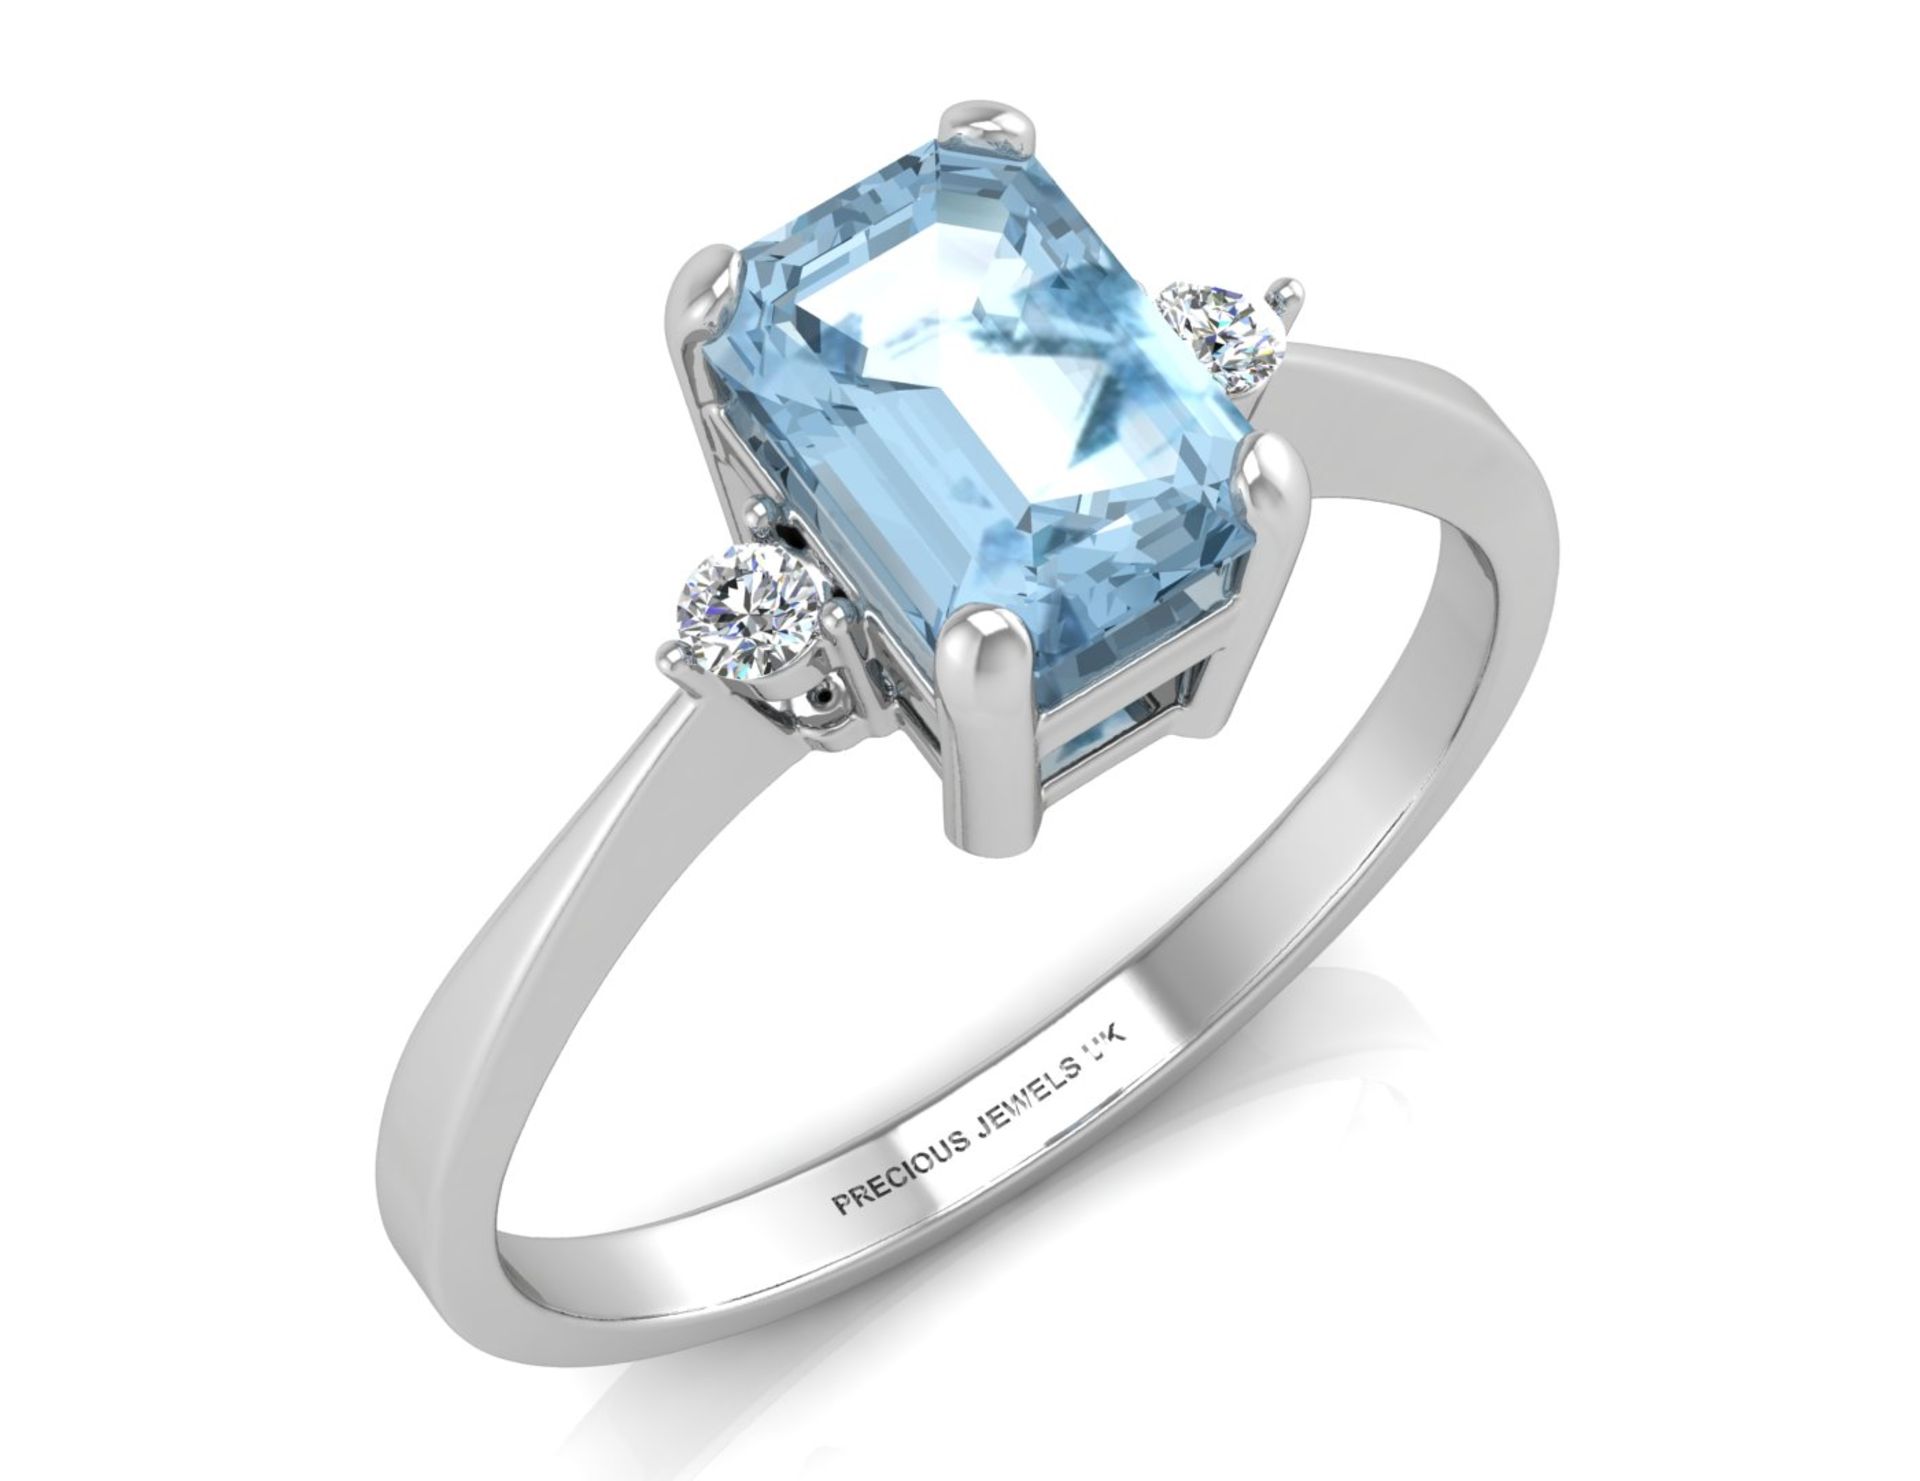 9ct White Gold Diamond And Emerald Cut Blue Topaz Ring (BT1.21) 0.04 Carats - Valued By GIE £1,495.